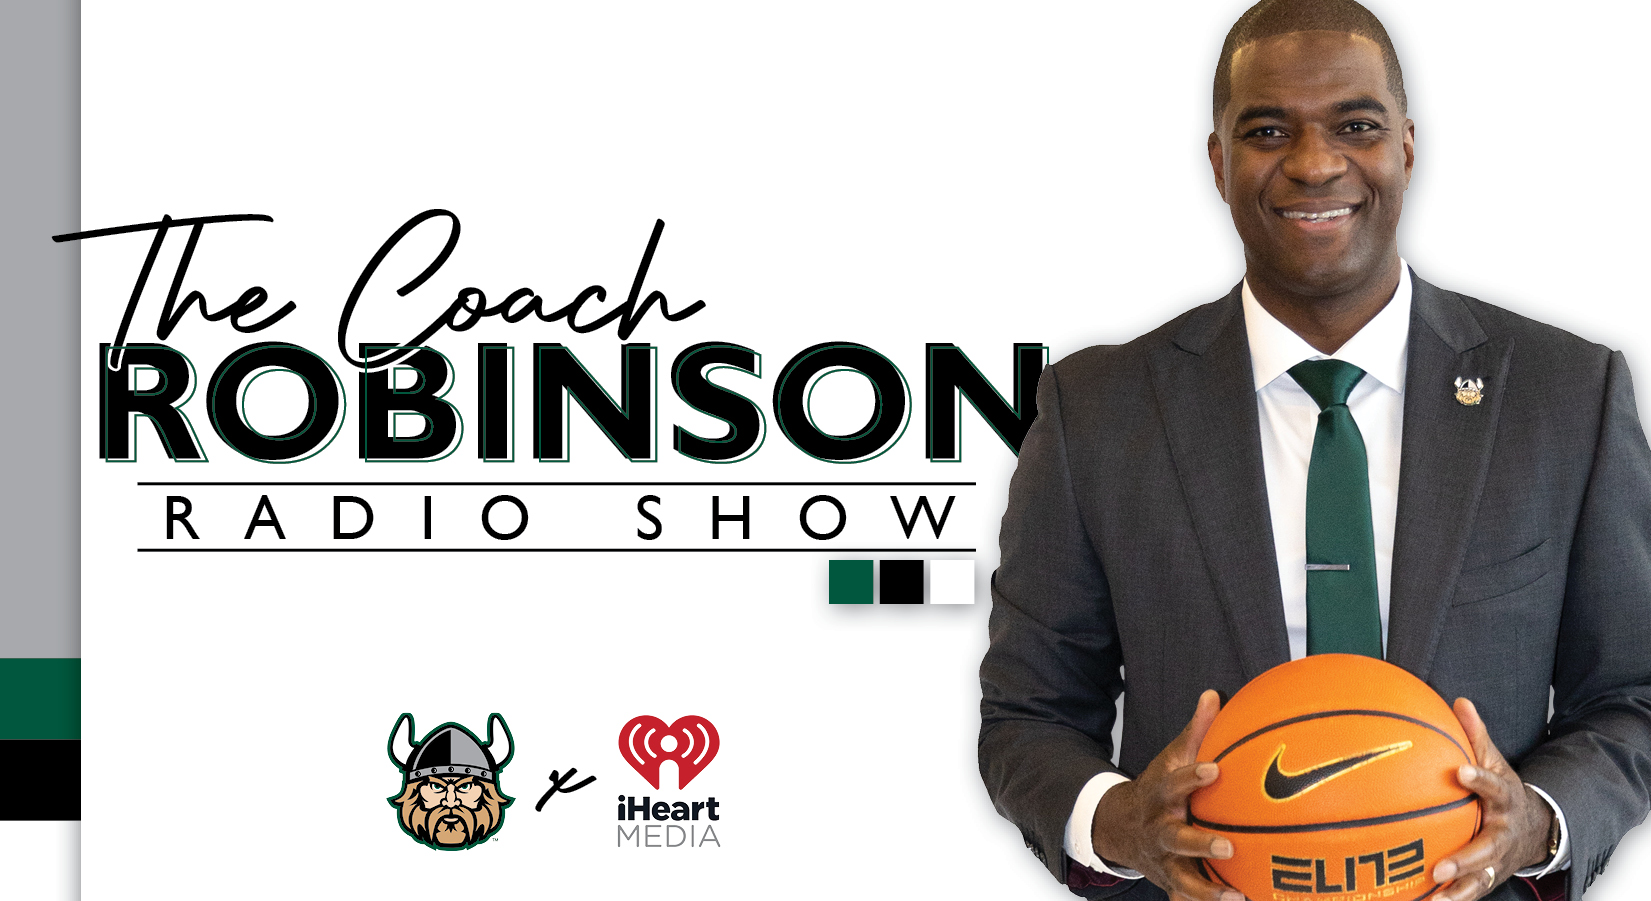 Coach Robinson Show Live Tonight from Dave and Buster’s on Fox Sports 1350 AM